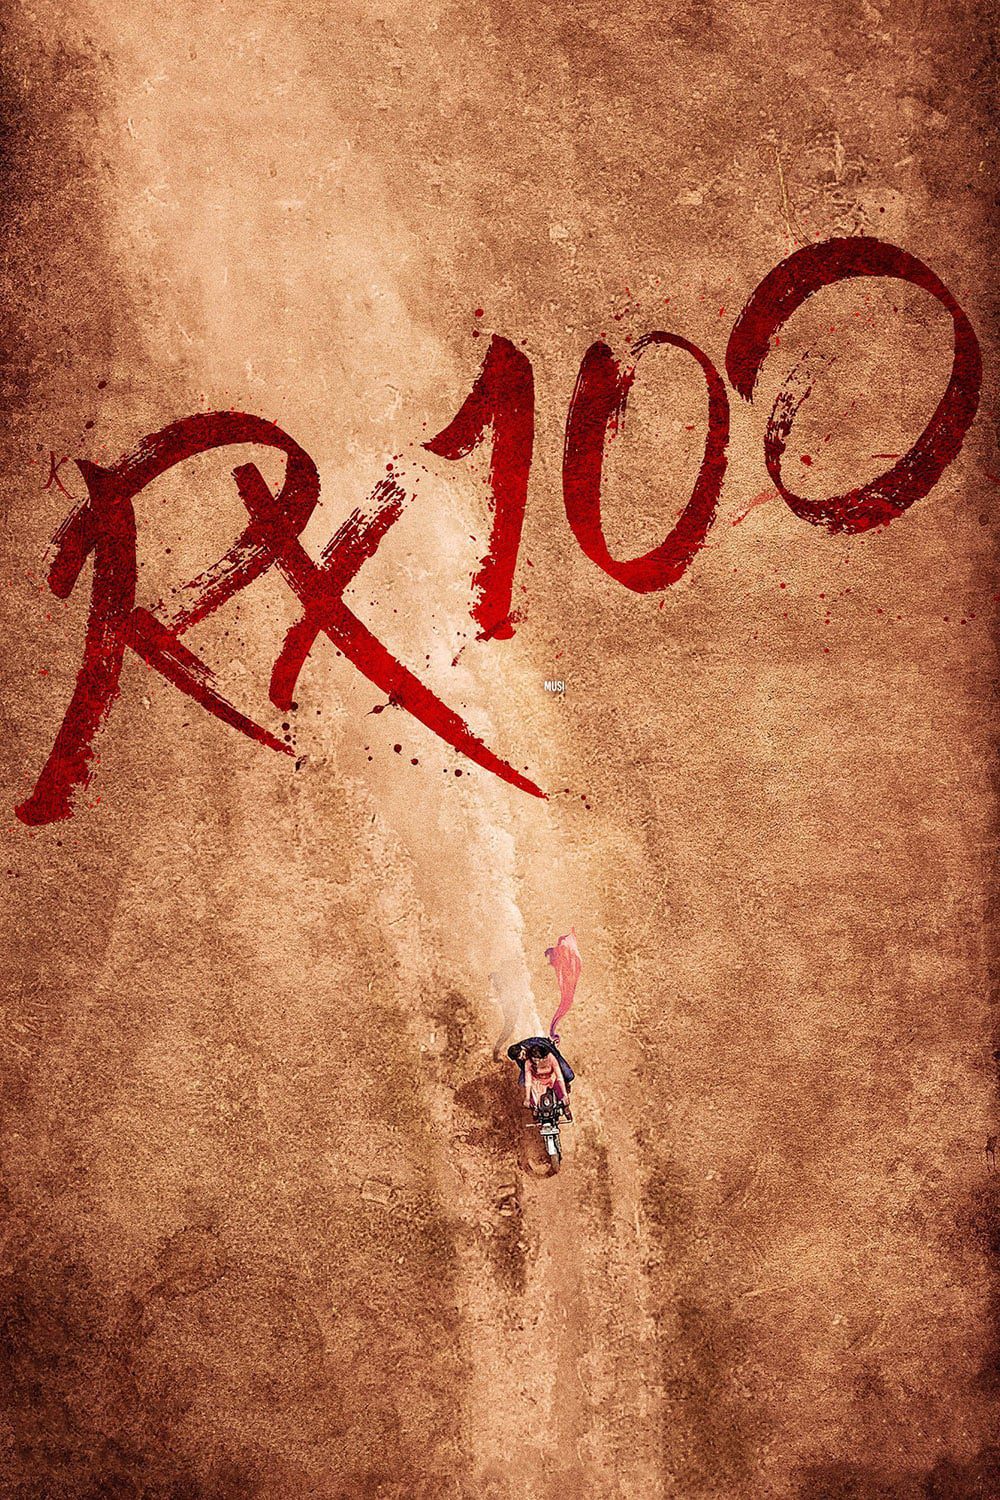 Poster for the movie "RX 100"